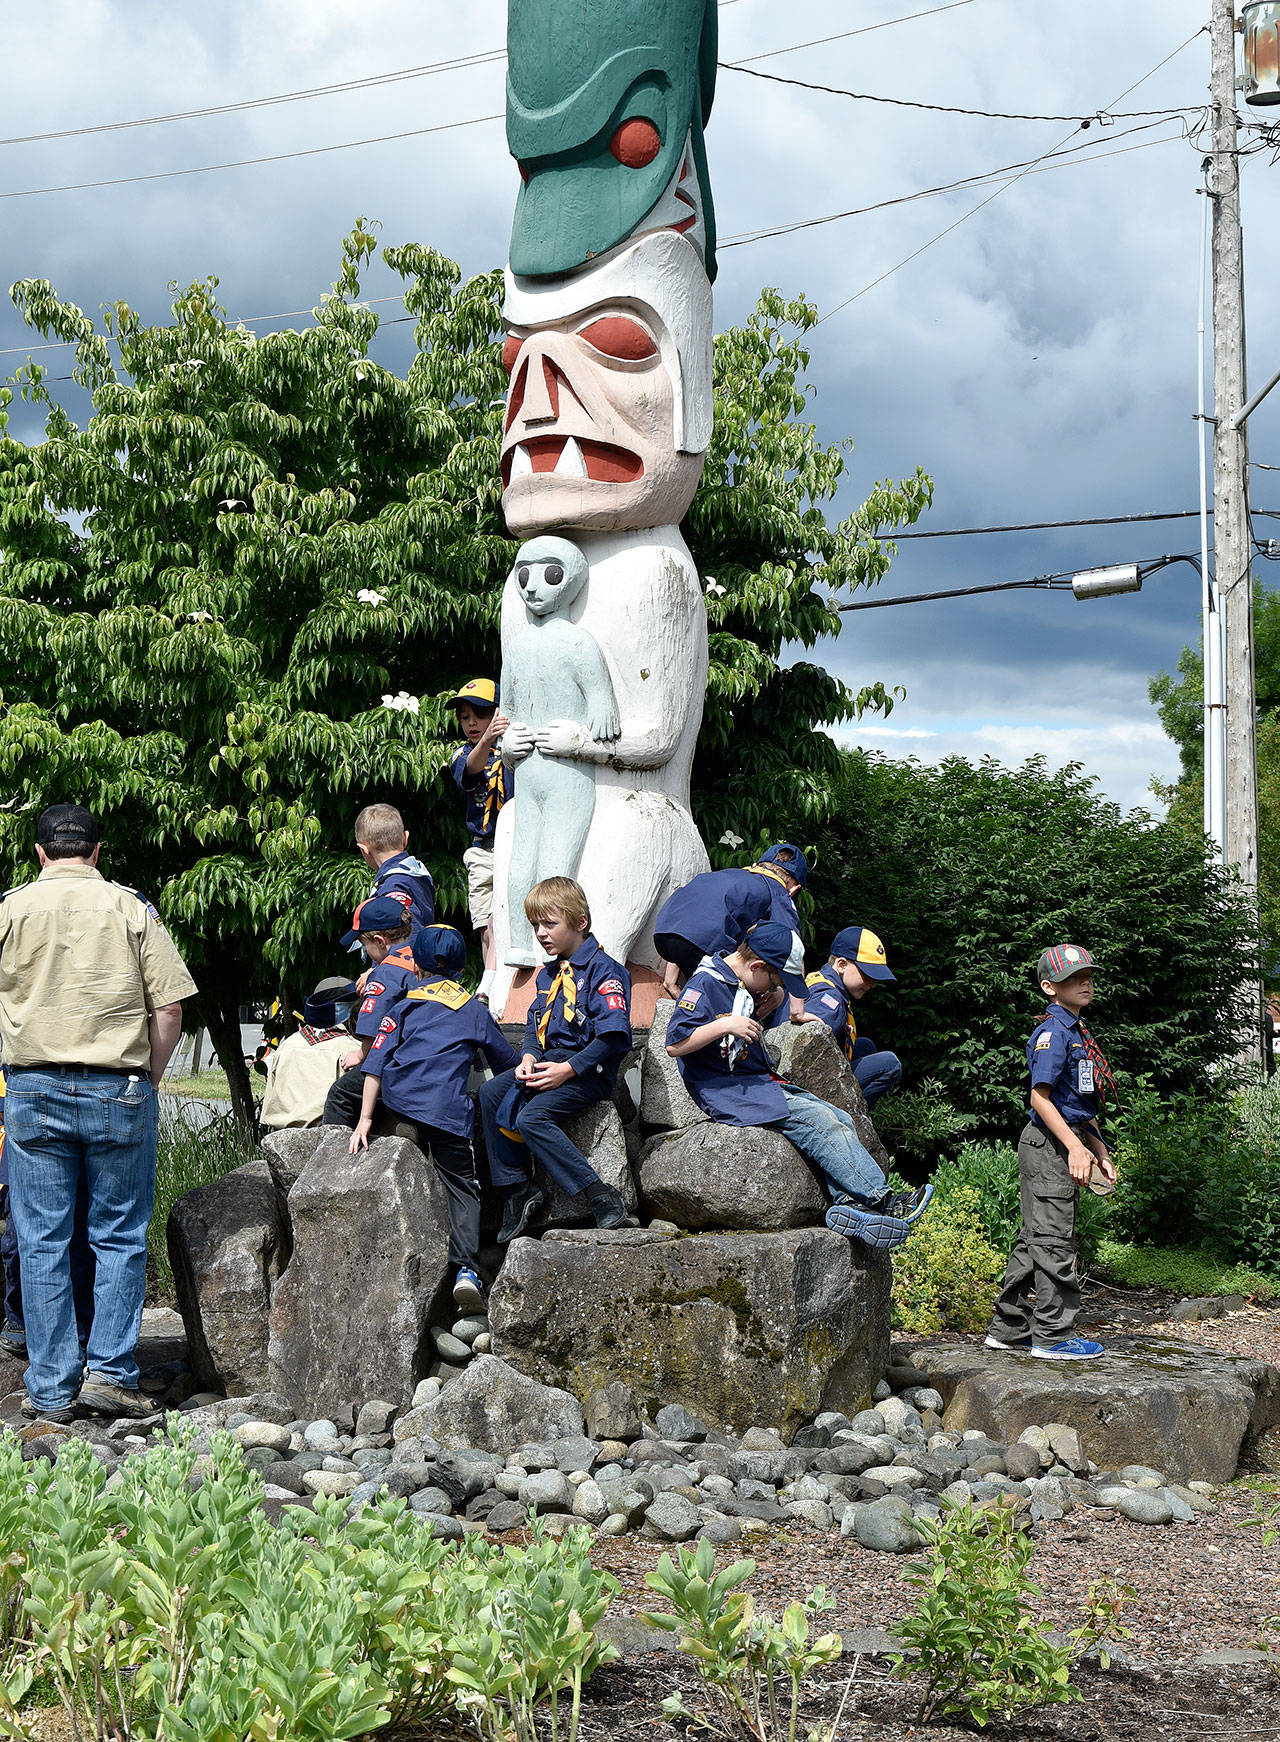 Boy Scouts from Troop 425 lounge on the Totem Garden totem pole as the floats line up for the Grand Parade Saturday.                                Carol Ladwig/Staff Photo